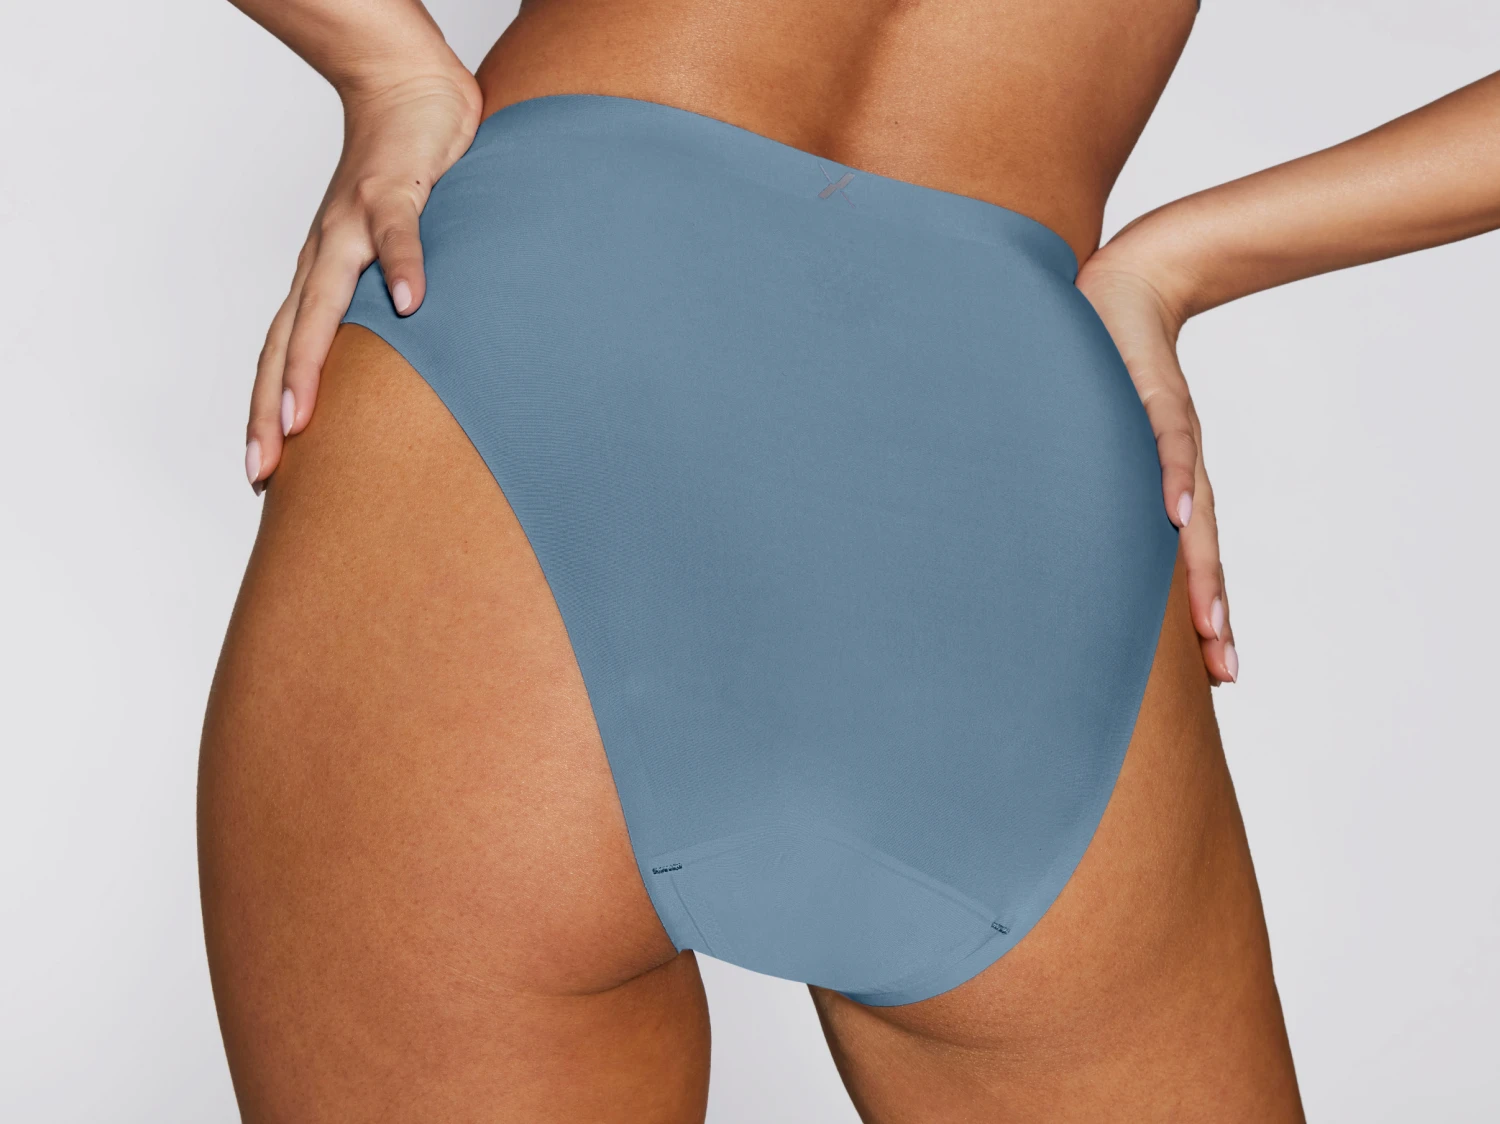 Save up to 25% on undies when you make a bundle. Now including NEW Dusty Blue.